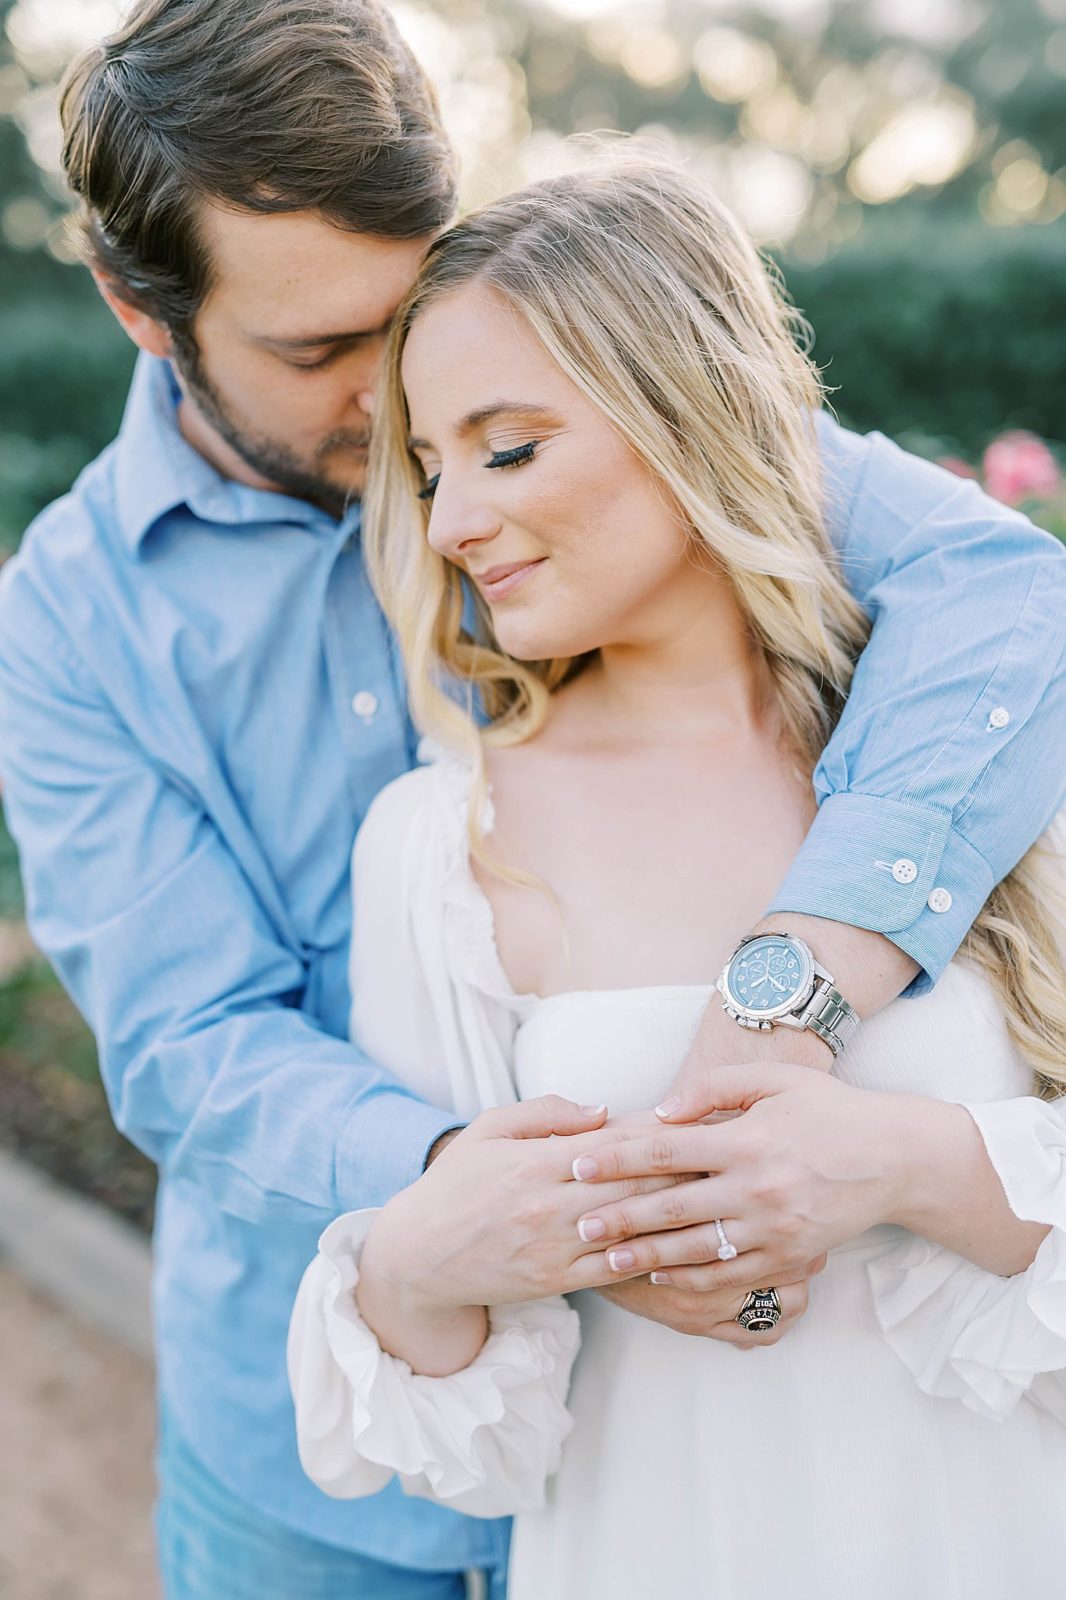 Houston engagement session at McGovern Centennial Gardens.